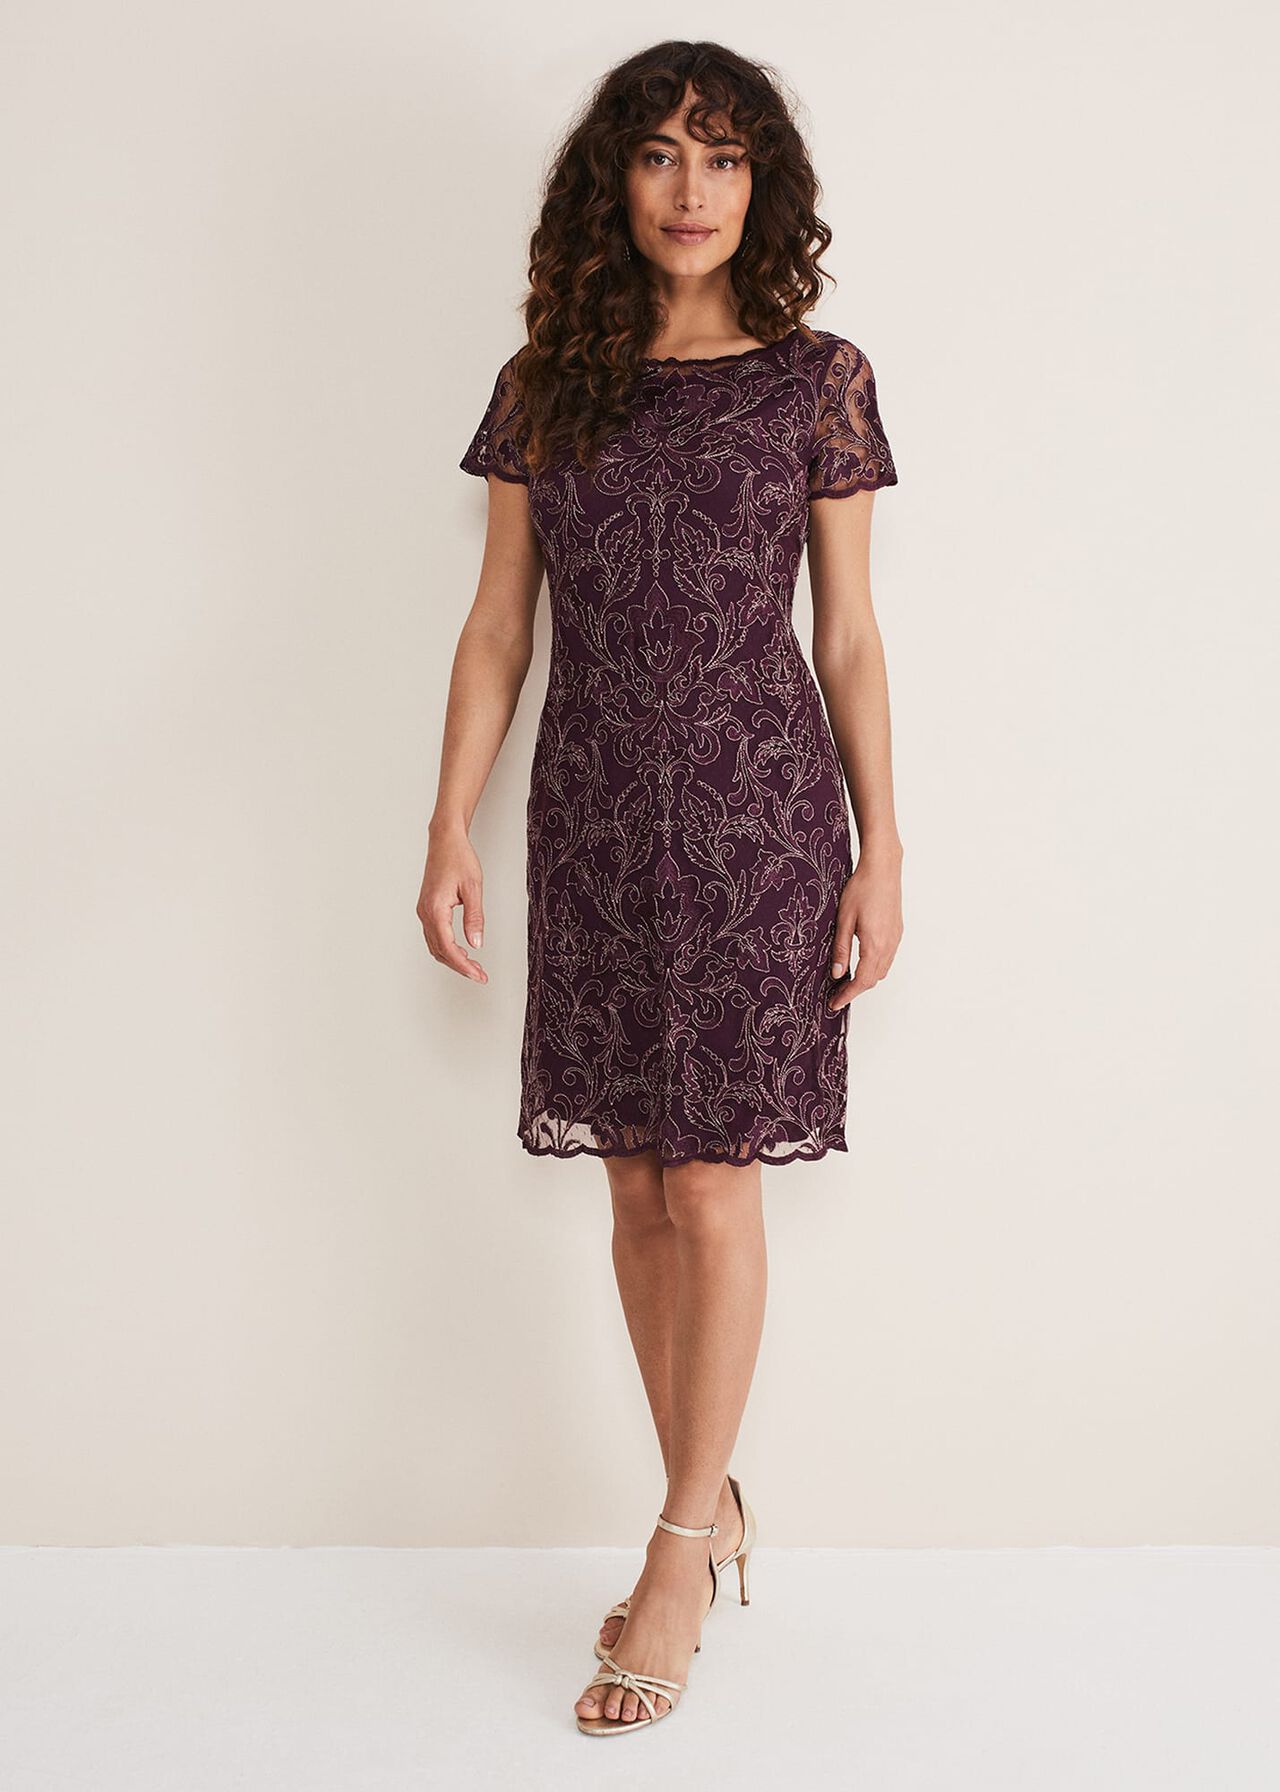 Heather Embroidered Dress